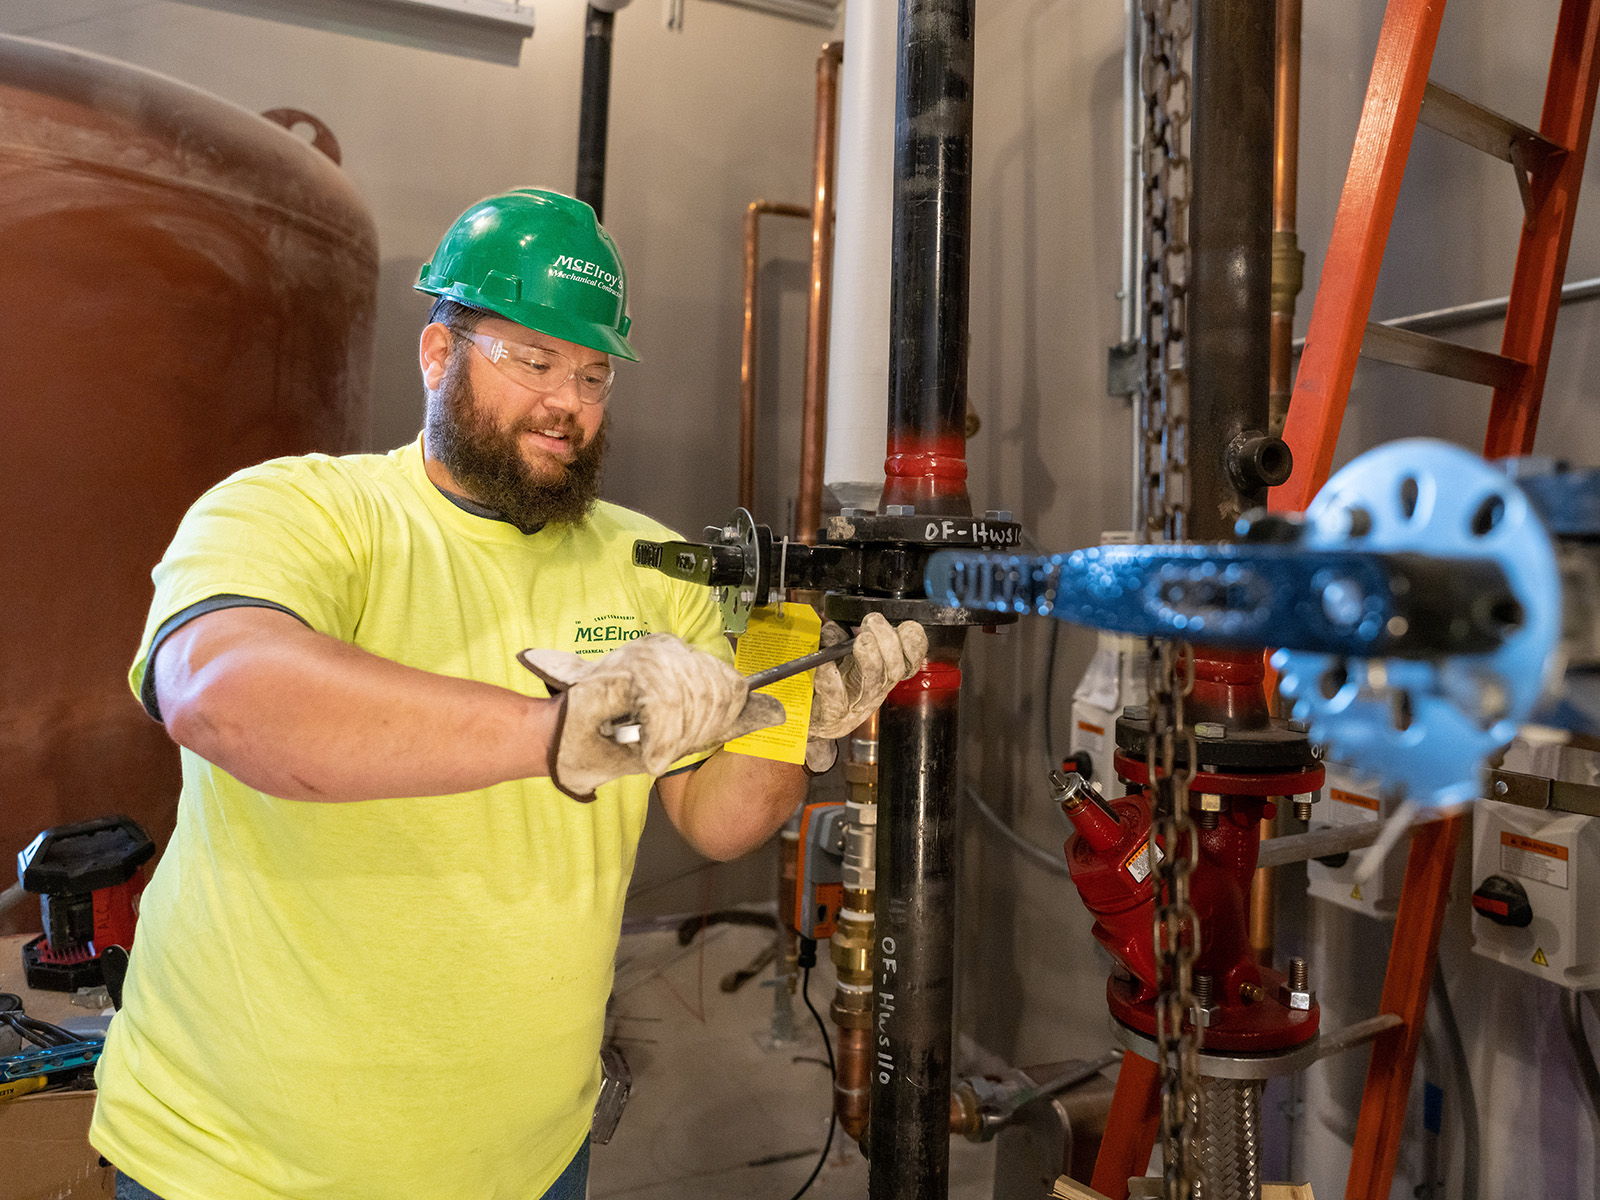 McElroy’s plumbing/pipefitting technician, Chris Perkins, works on new piping at the Evergy Emporia Service Center.